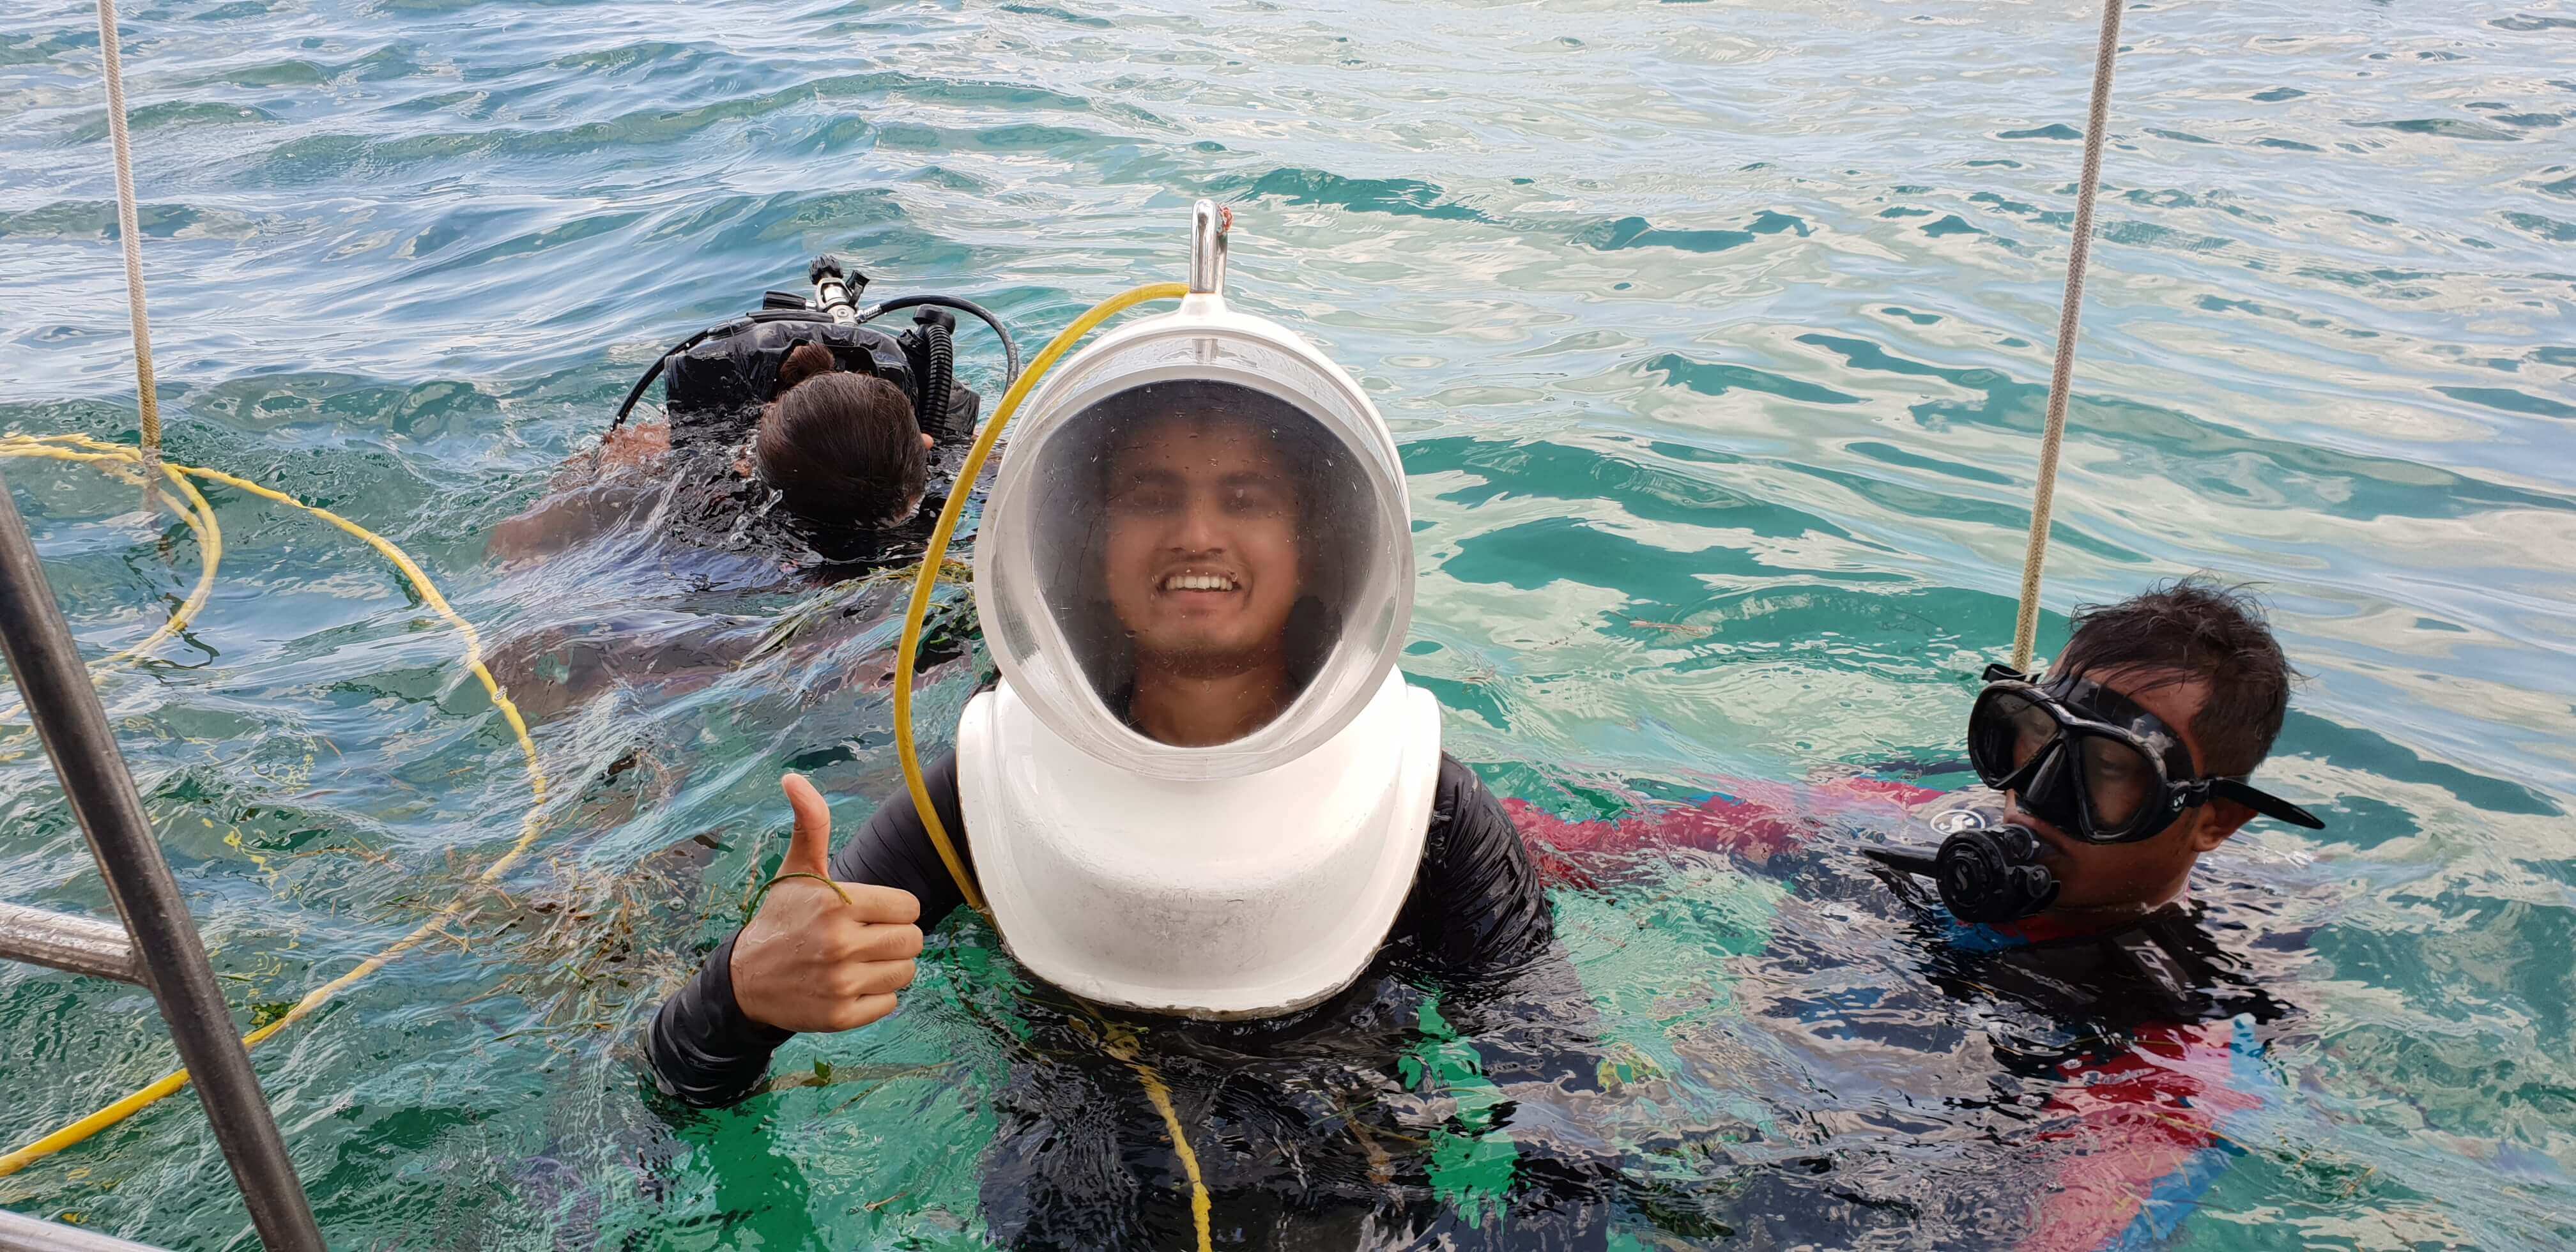 The Underwater Sea Walking Tour is one of the most thrilling things to do in Sanur